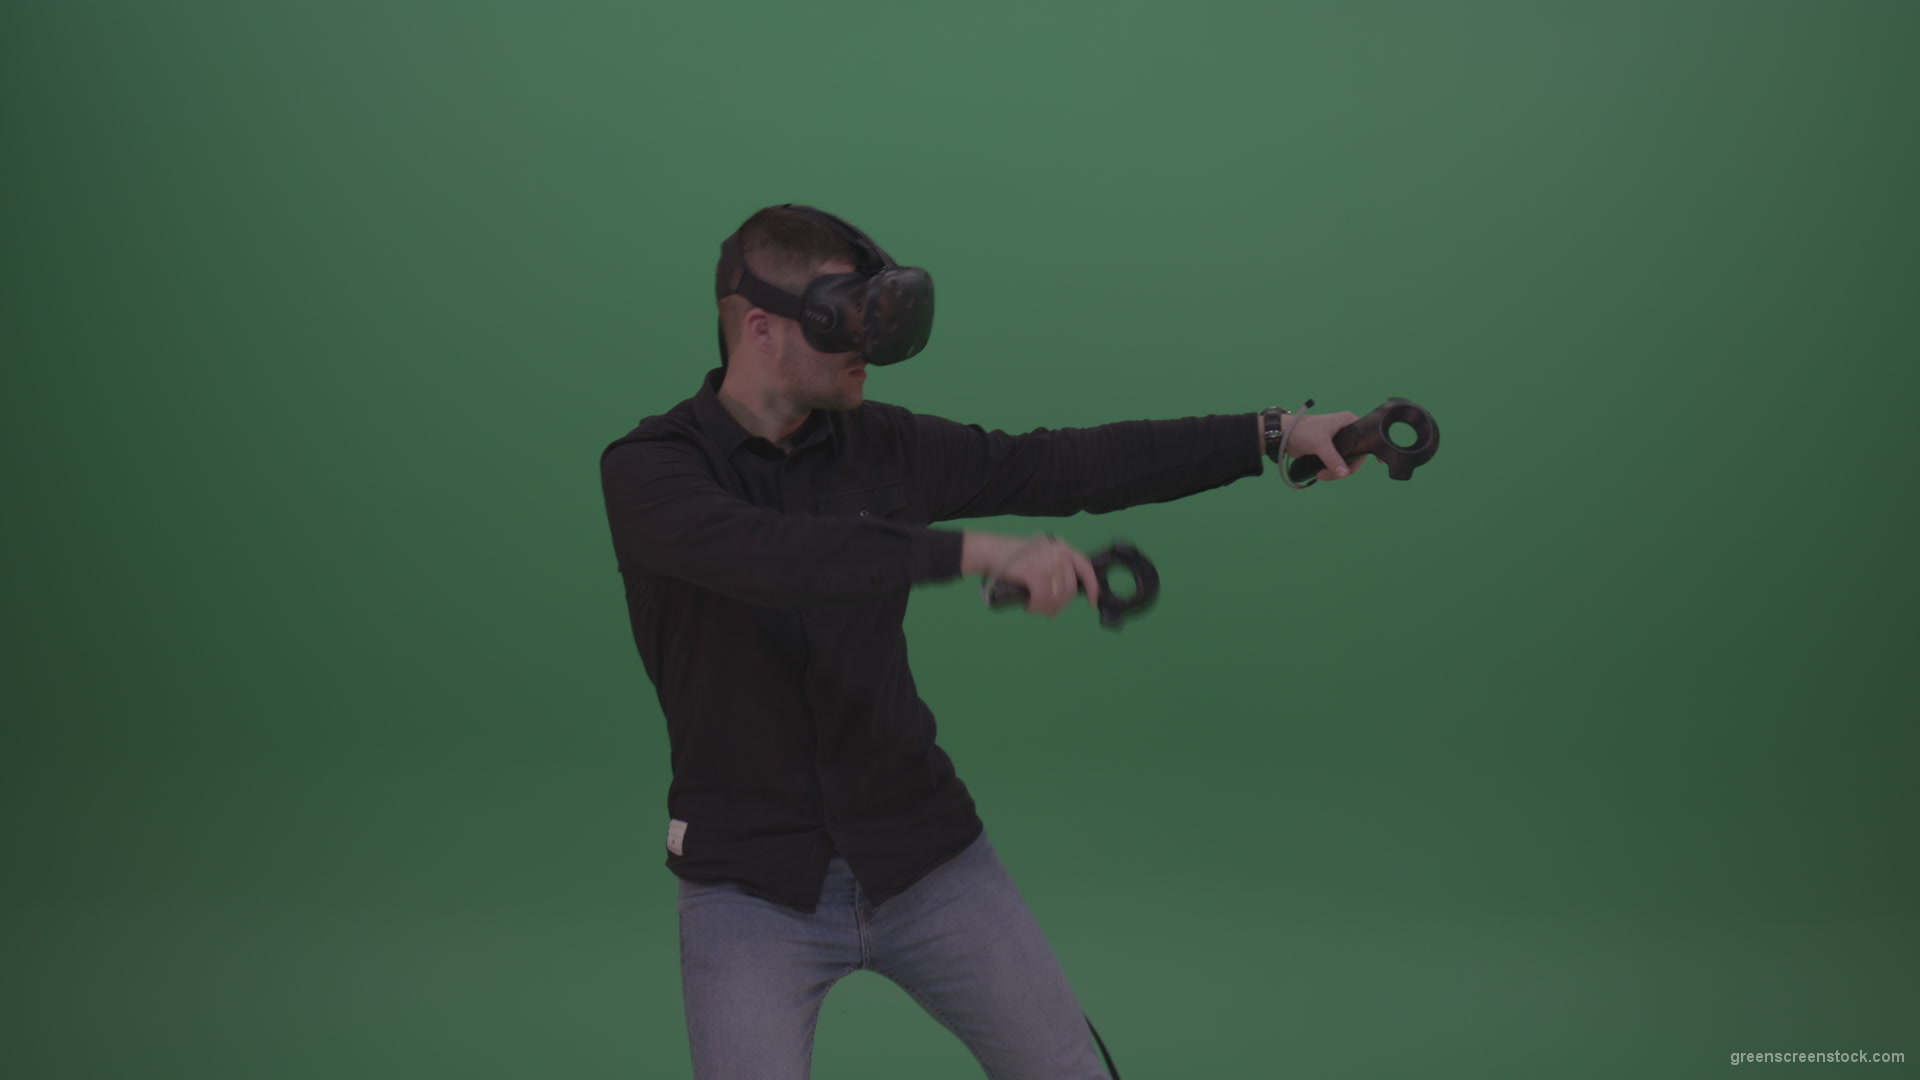 Young_Dangerous_Brunette_Man_Wearing_Black_Shirt_Shooting_Enemies_All_Around_In_Virtual_Reality_Glasses_Green_Screen_Wall_Background_004 Green Screen Stock